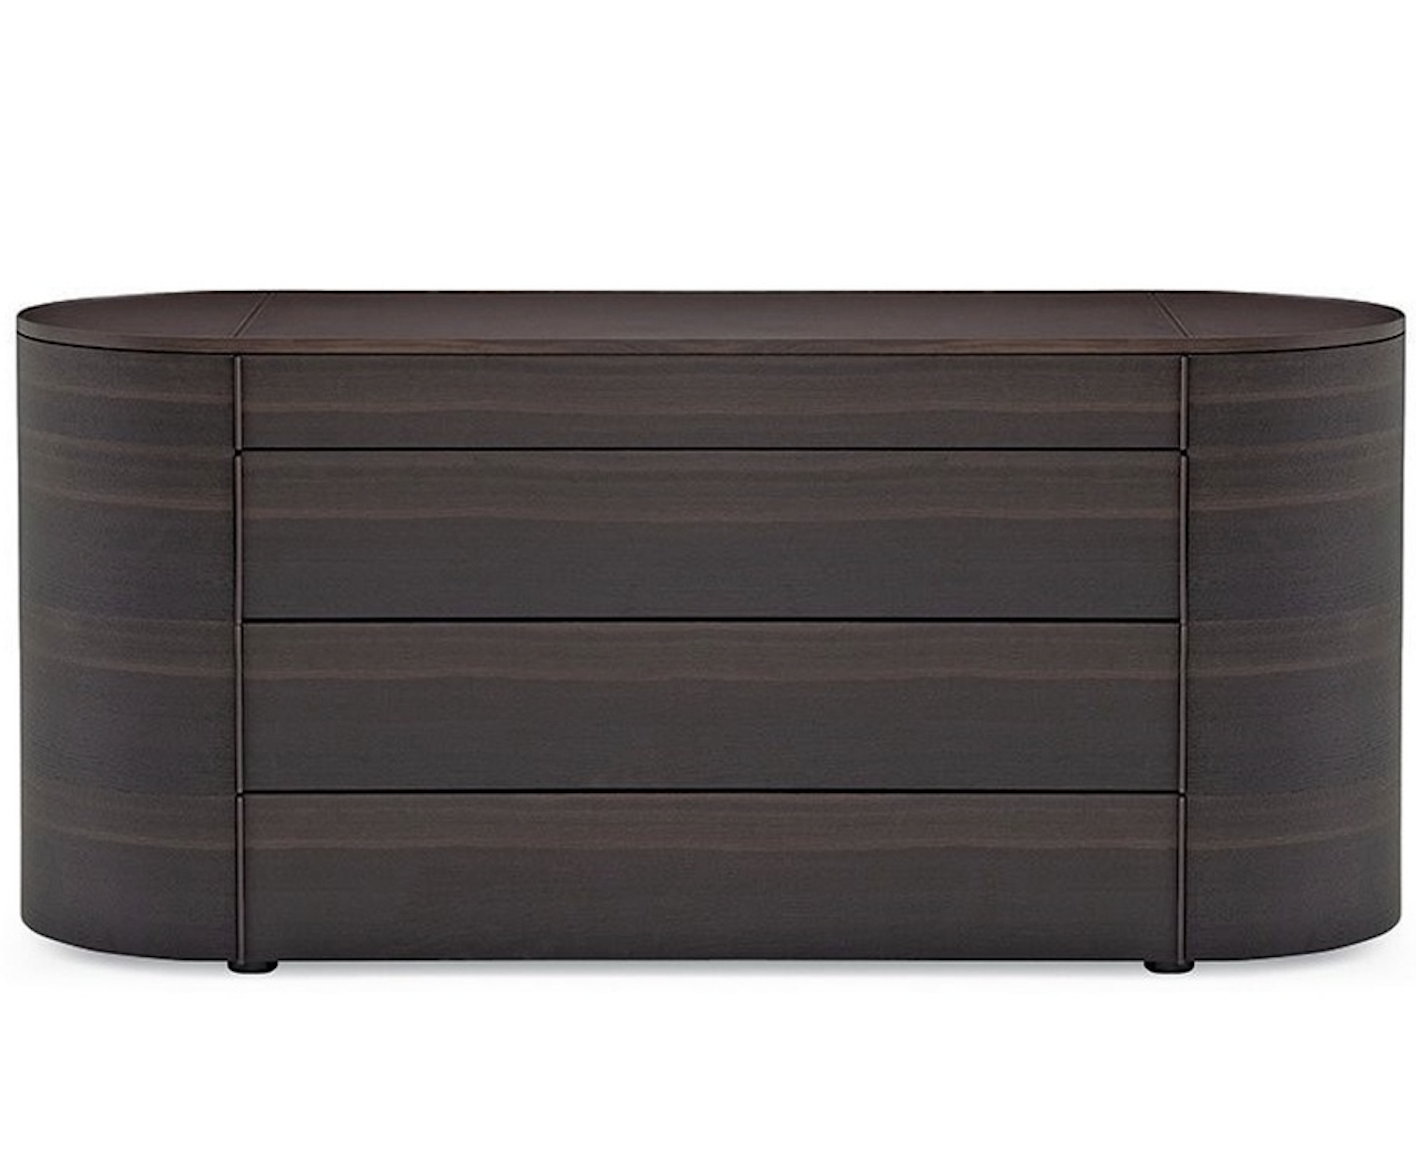 Product Image onda chest of drawers